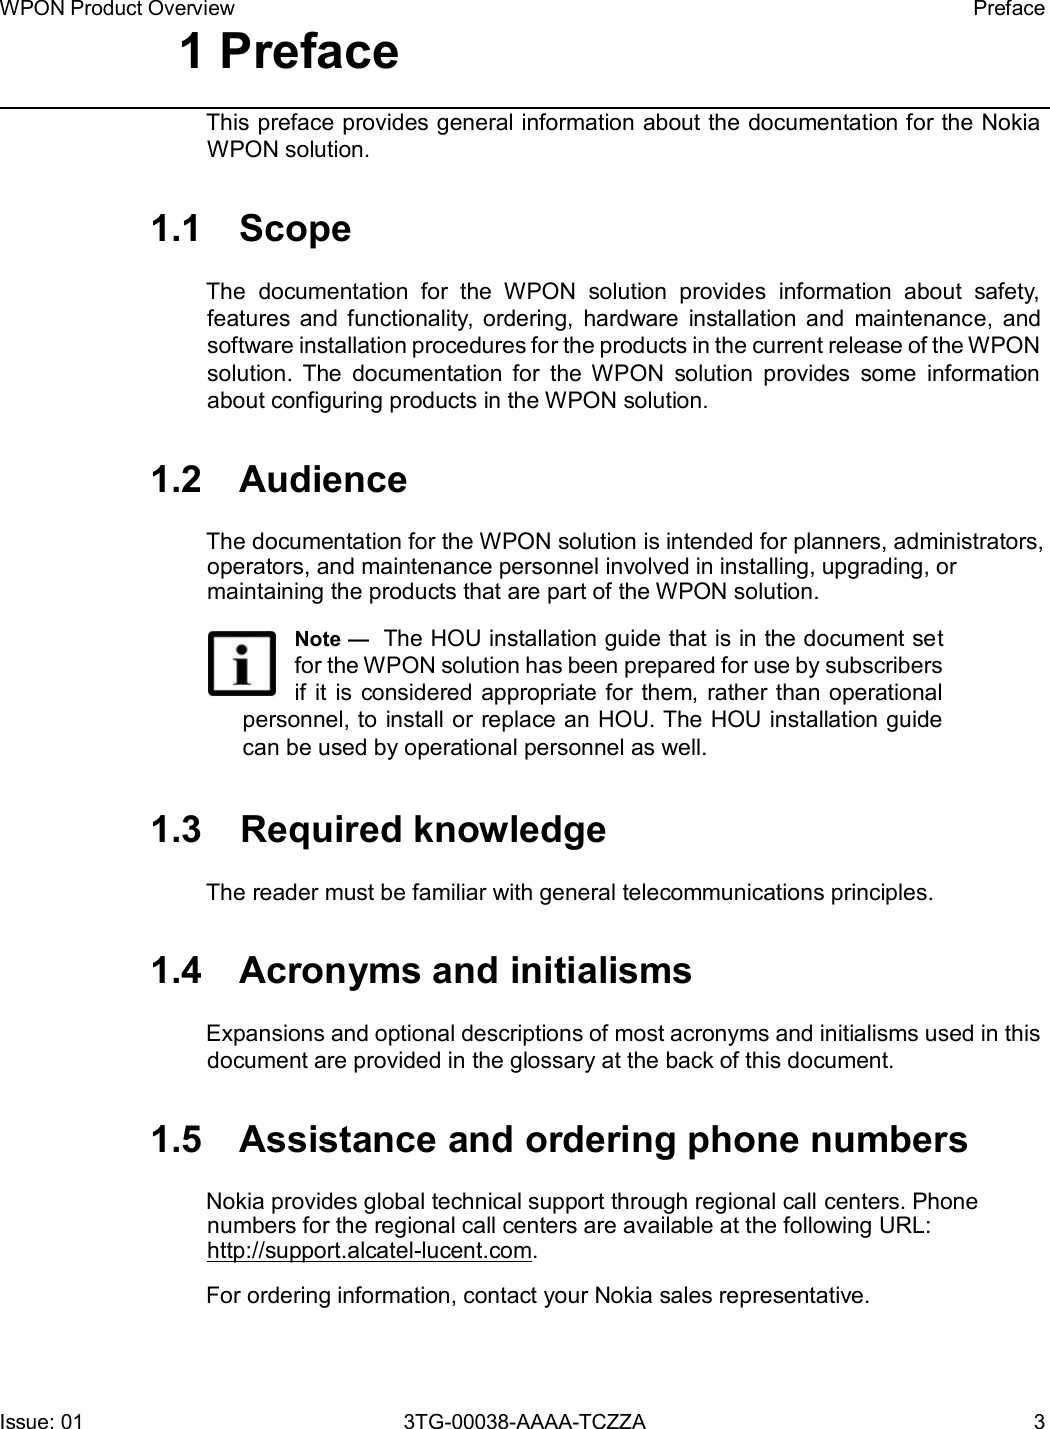 Page 3 of Nokia Bell 7577WPONAPAC WPON User Manual WPON Product Overview